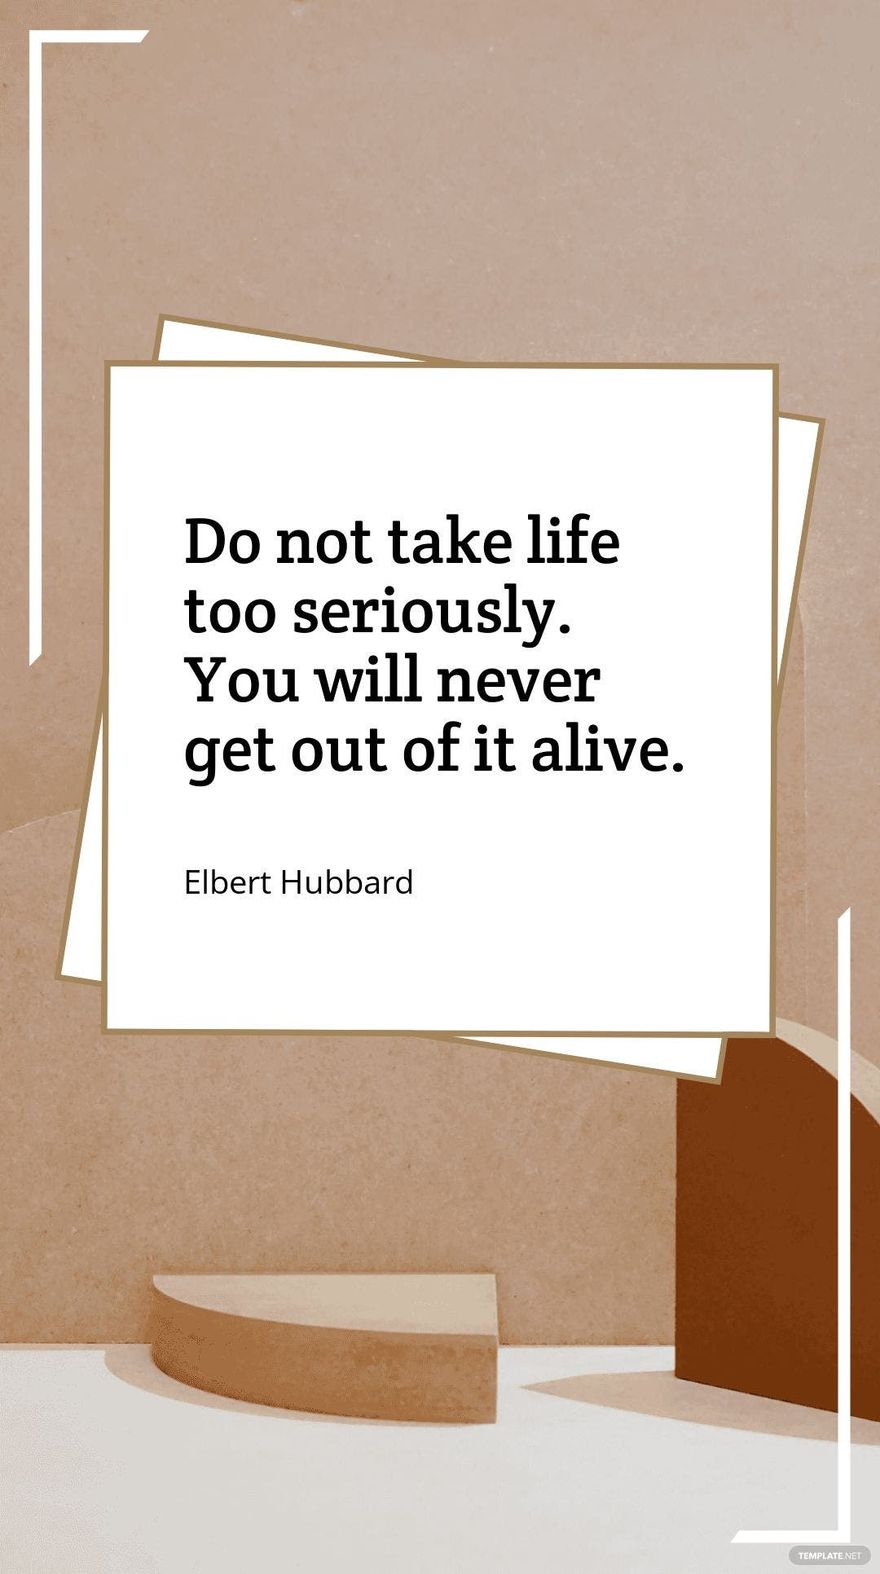 Elbert Hubbard - Do not take life too seriously. You will never get out of it alive. Template